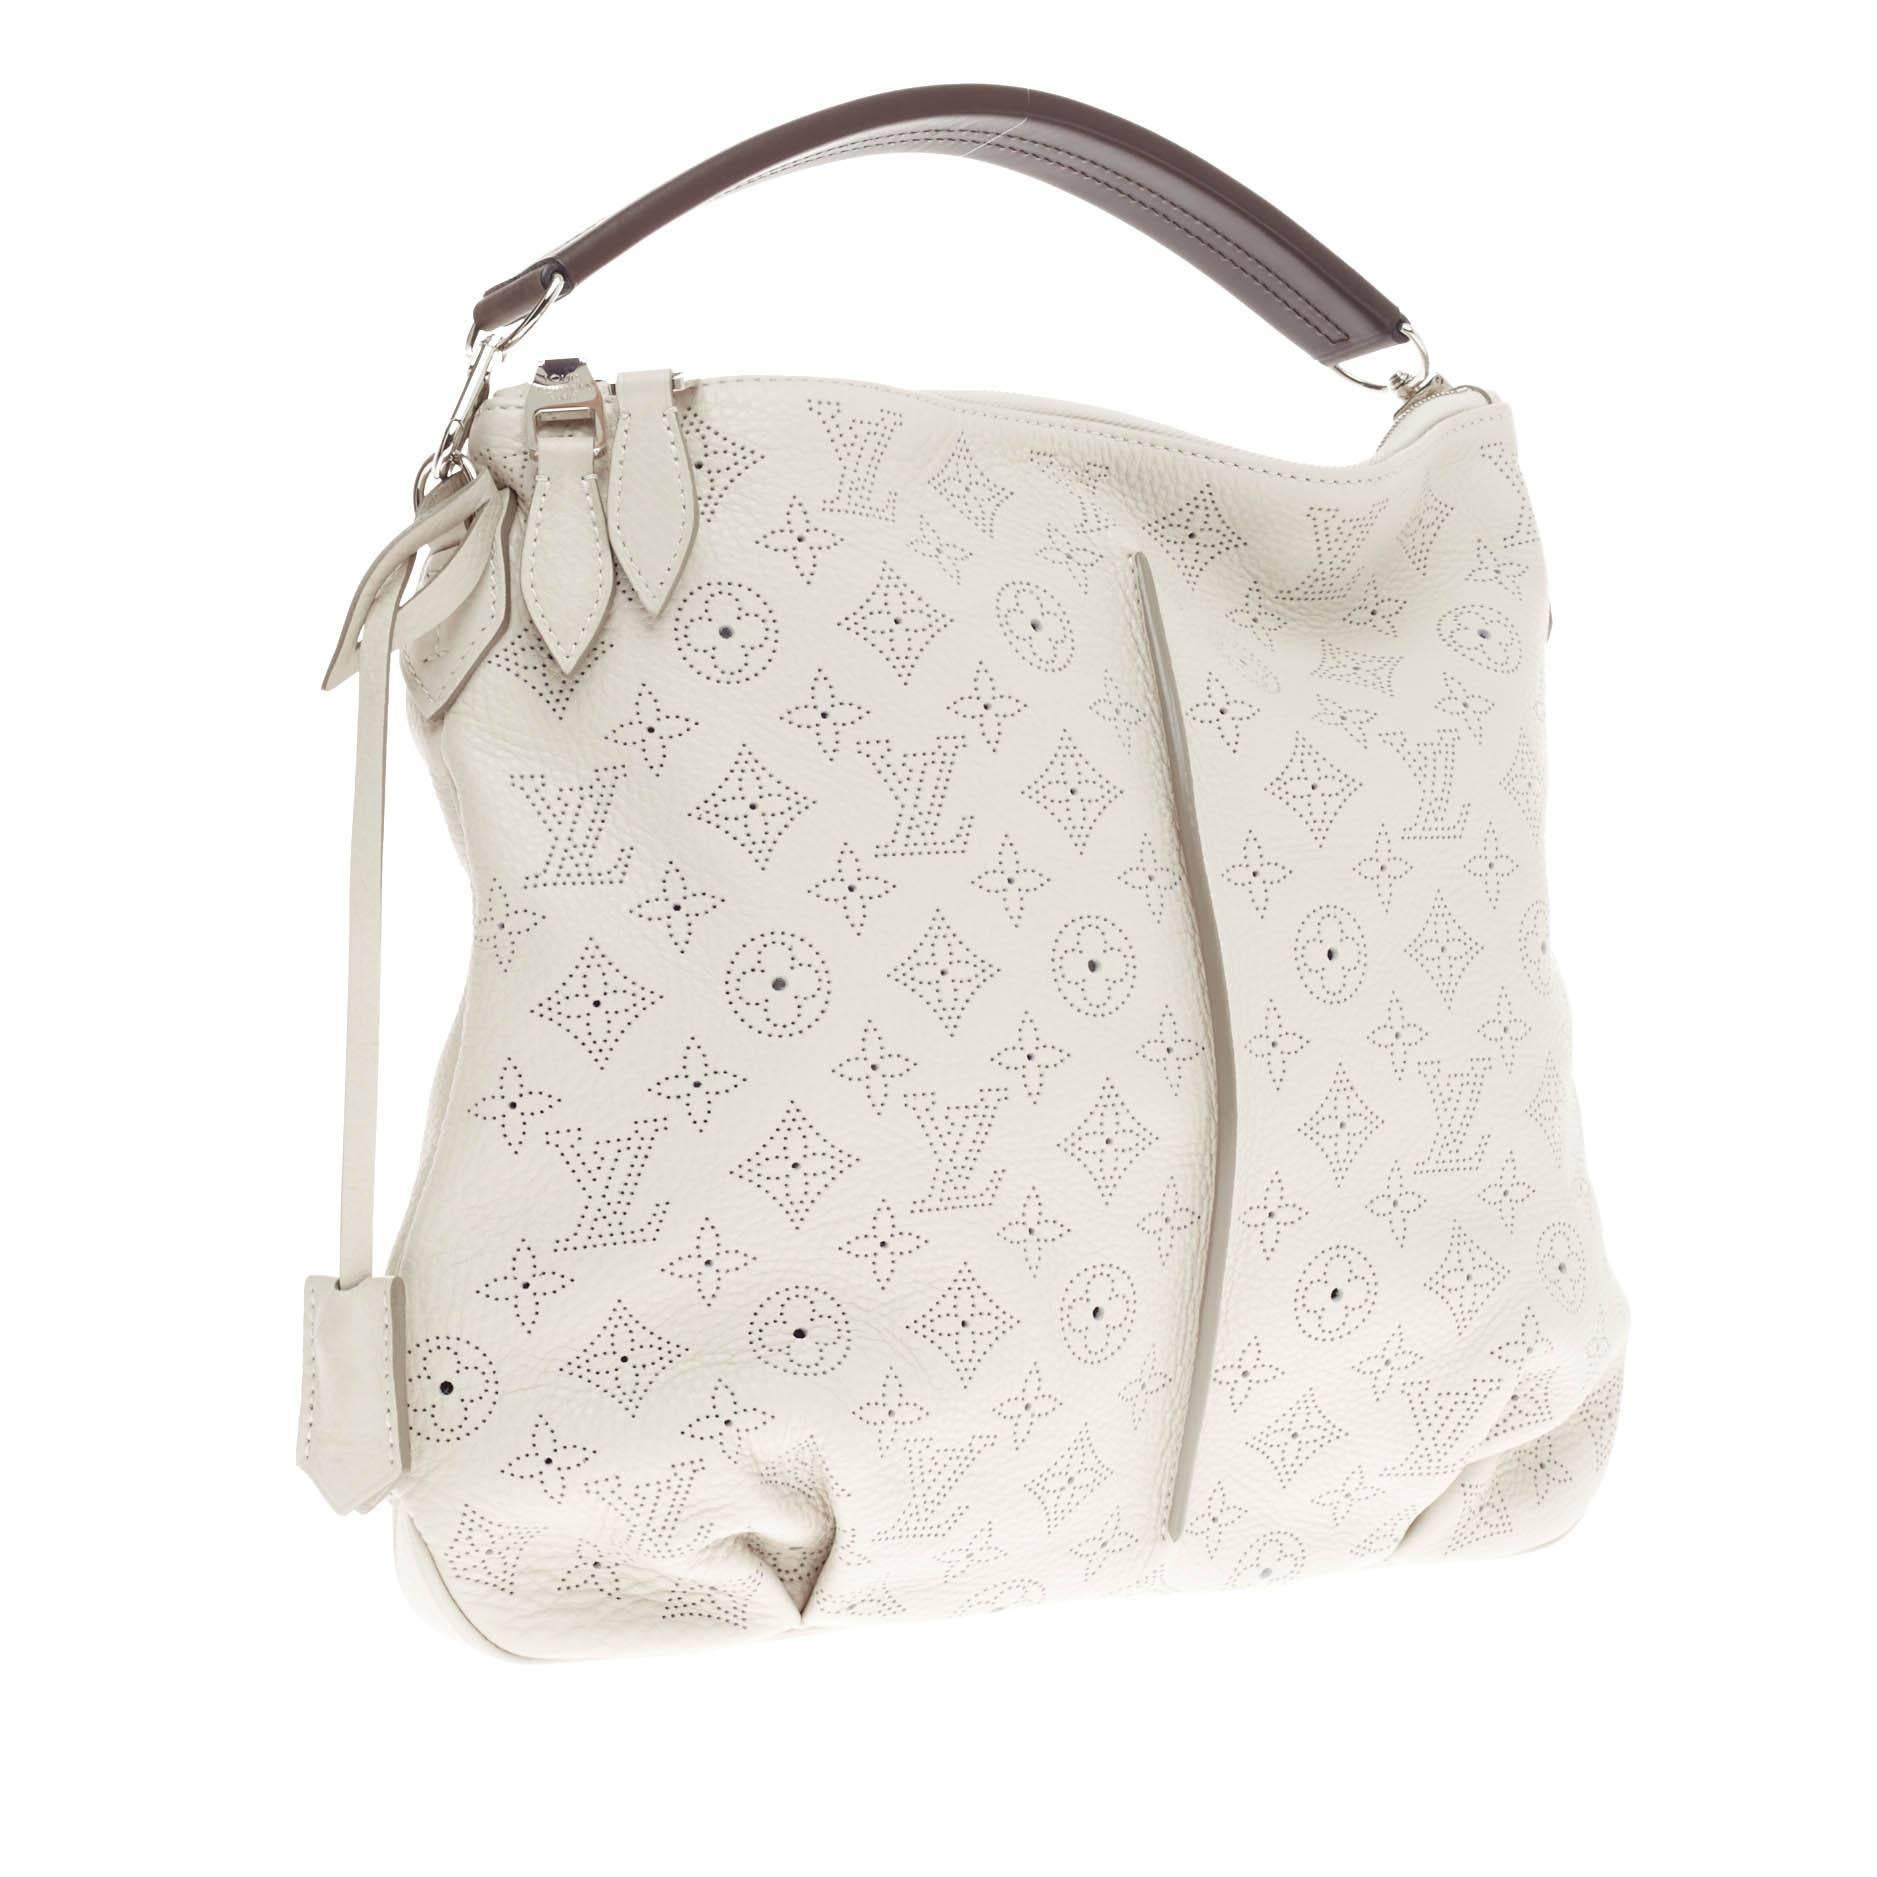 louis vuitton perforated leather handbag